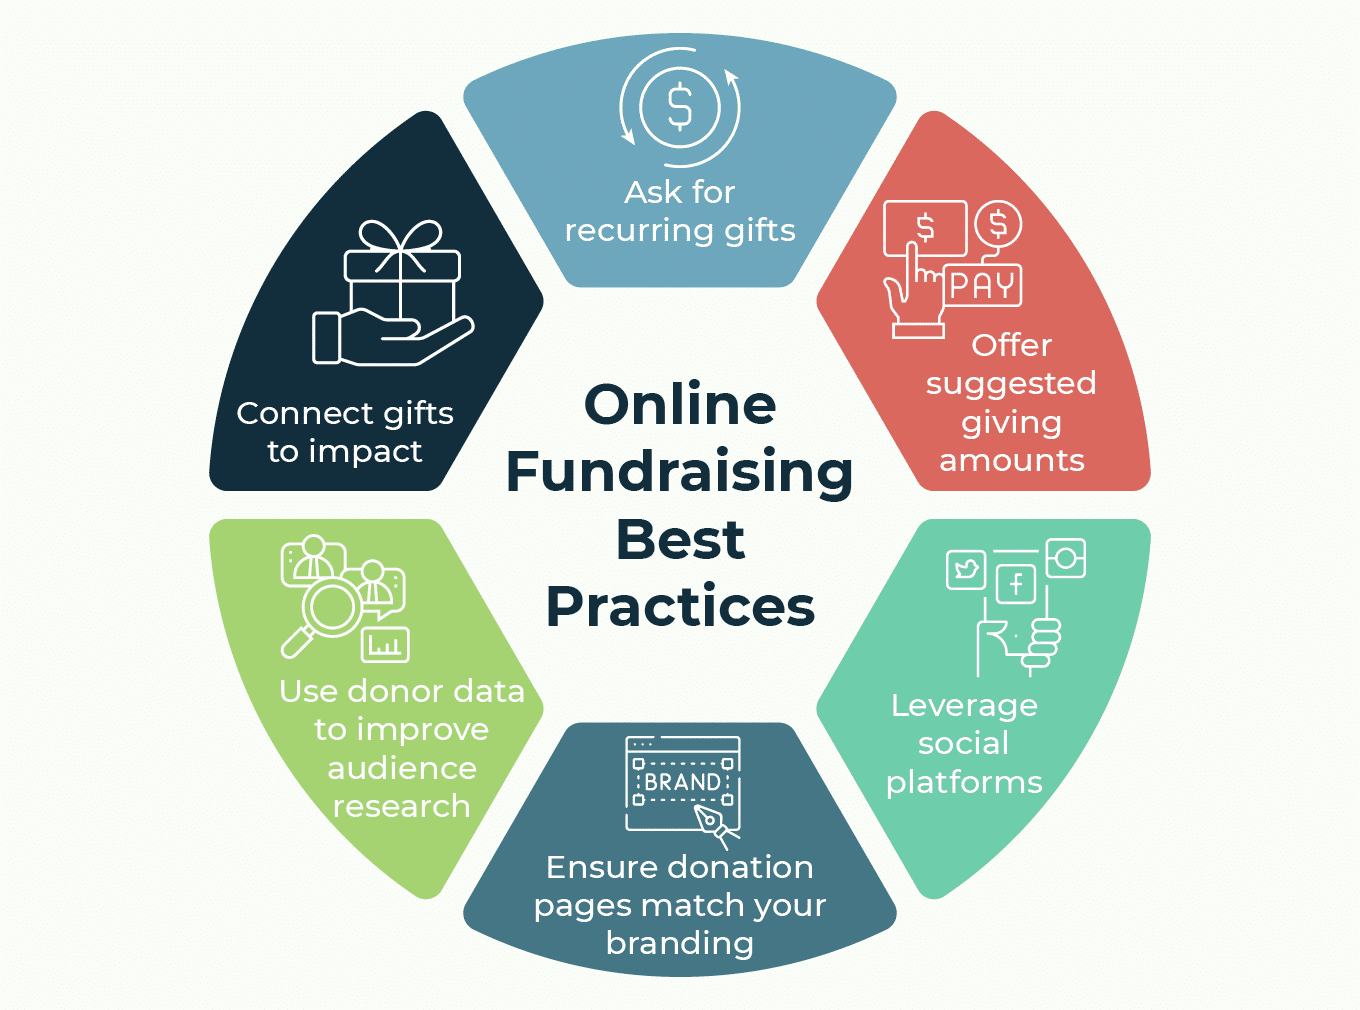 This image shows online fundraising best practices (described in detail in the text below).